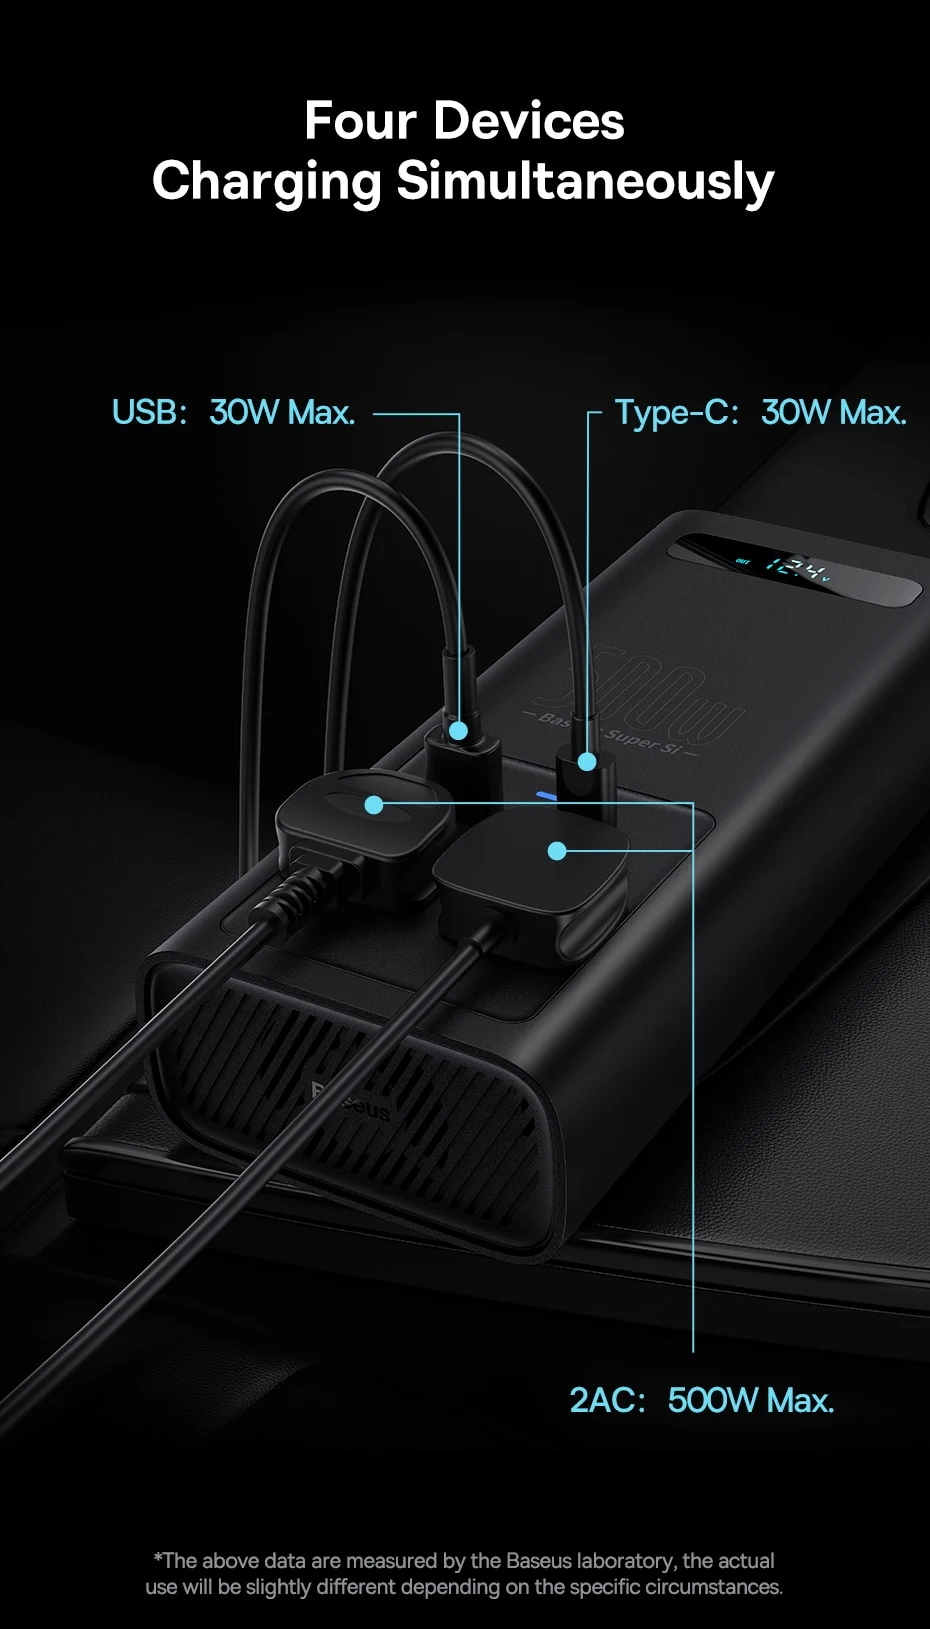 Four Devices Charging Simultaneously